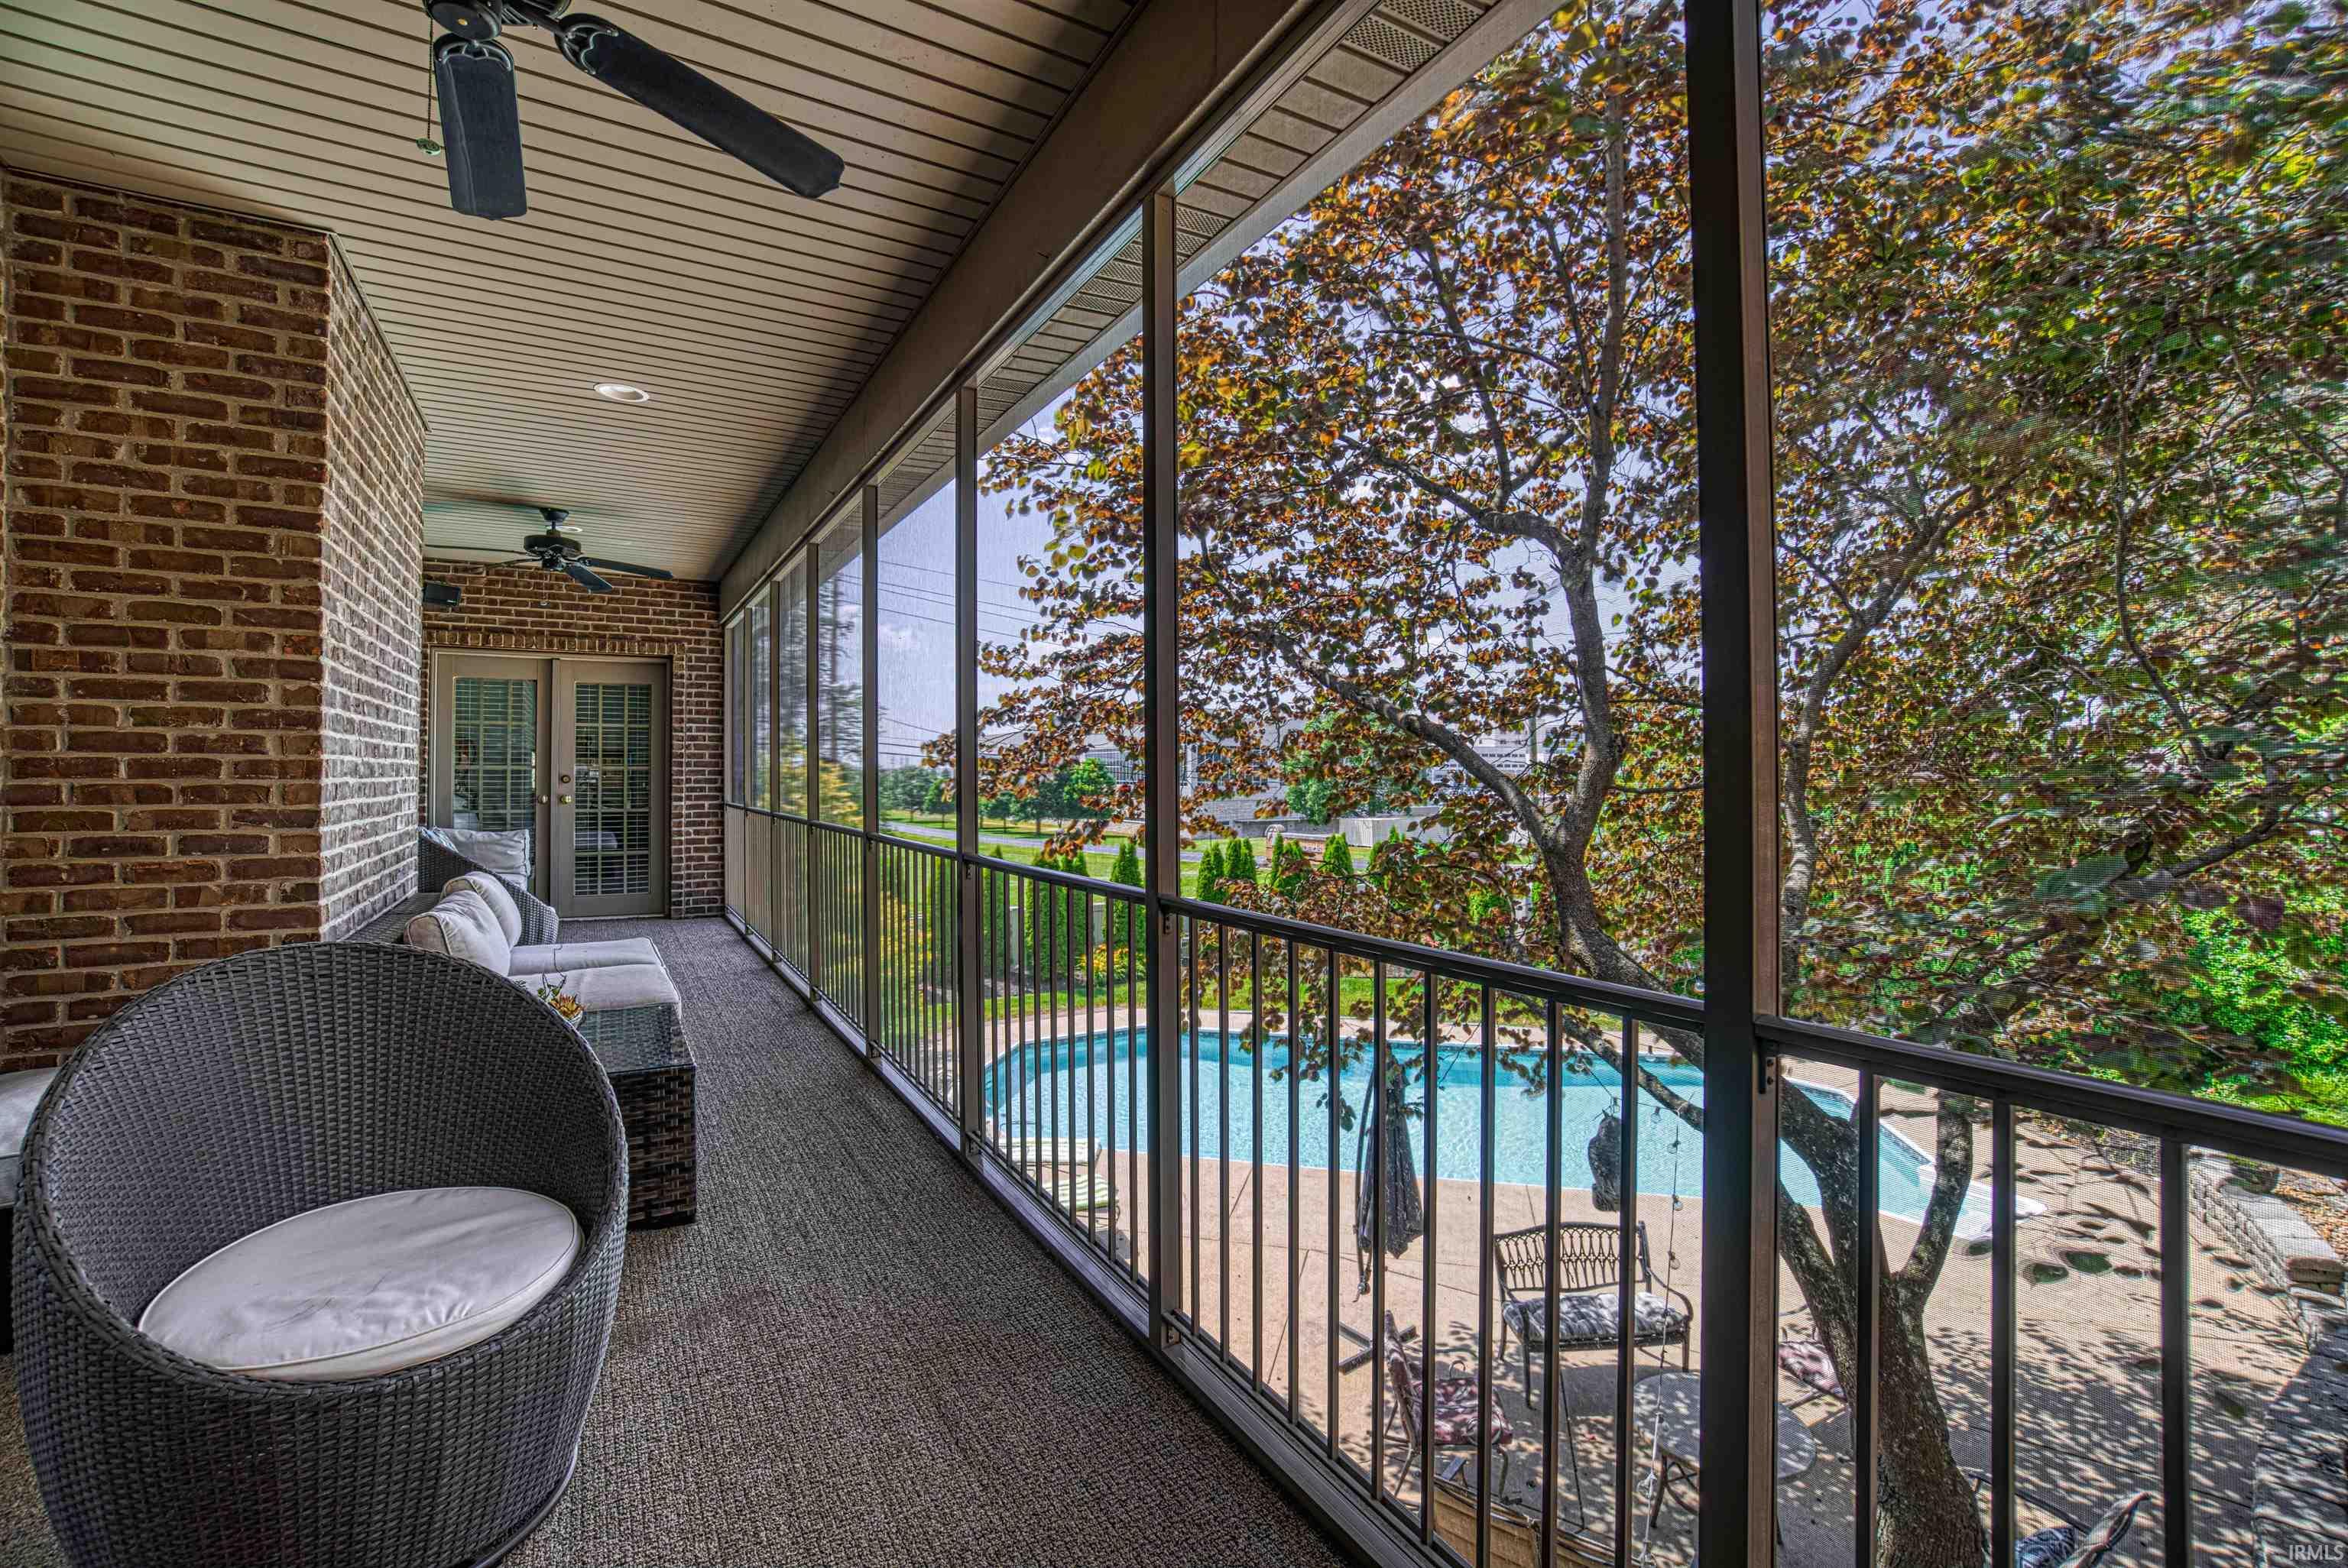 The screened balcony can be accessed from the formal and casual living areas and owner's suite